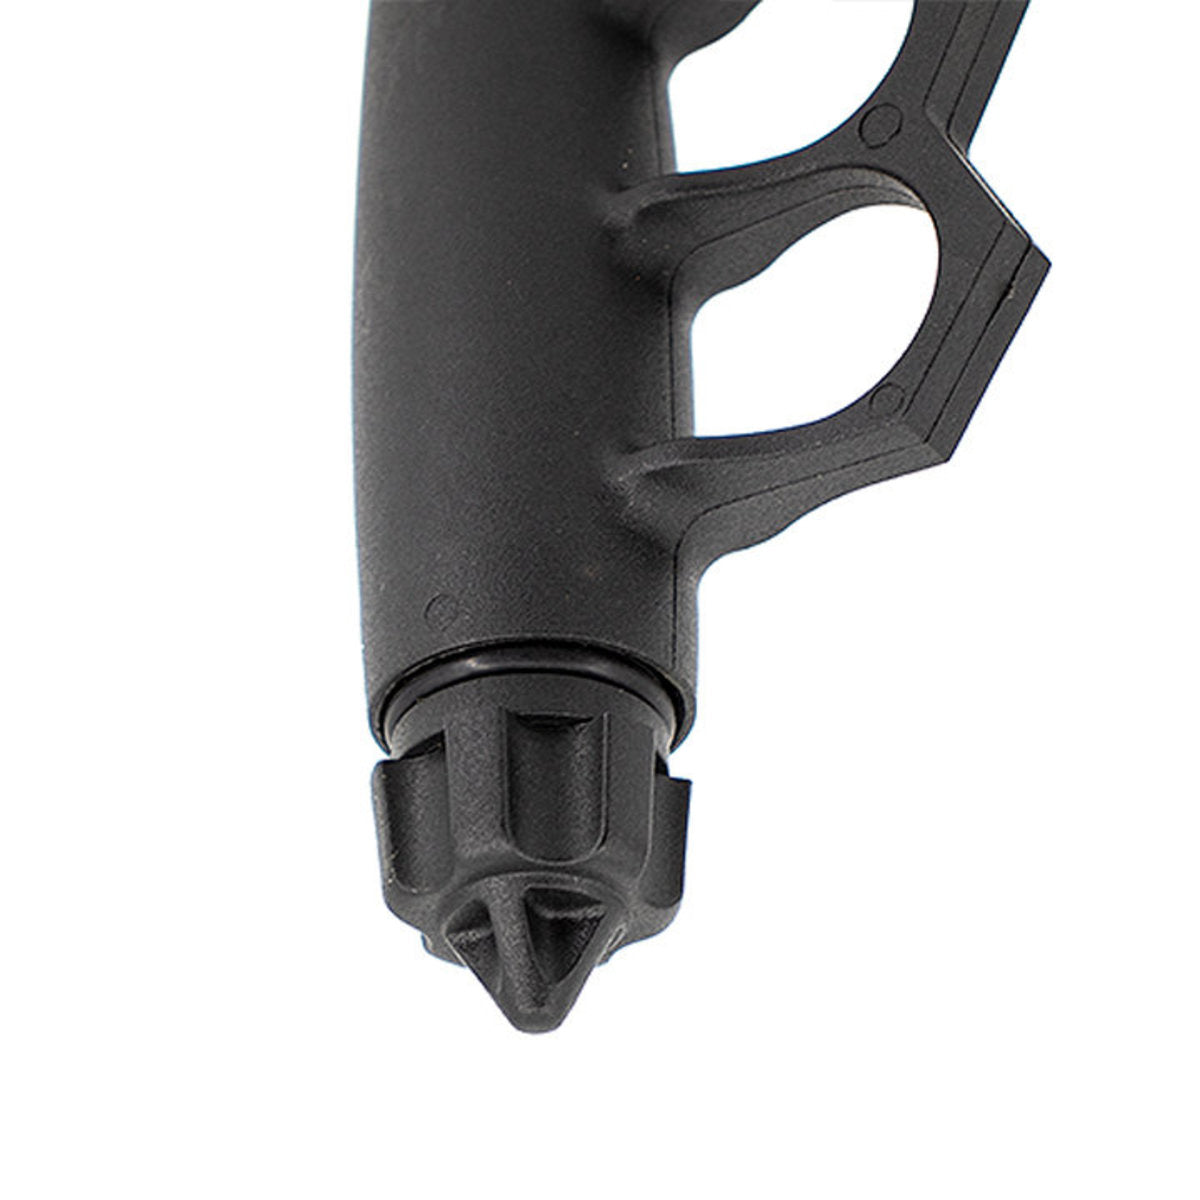 Valken Tactical Zombie Buster Foregrip - Black